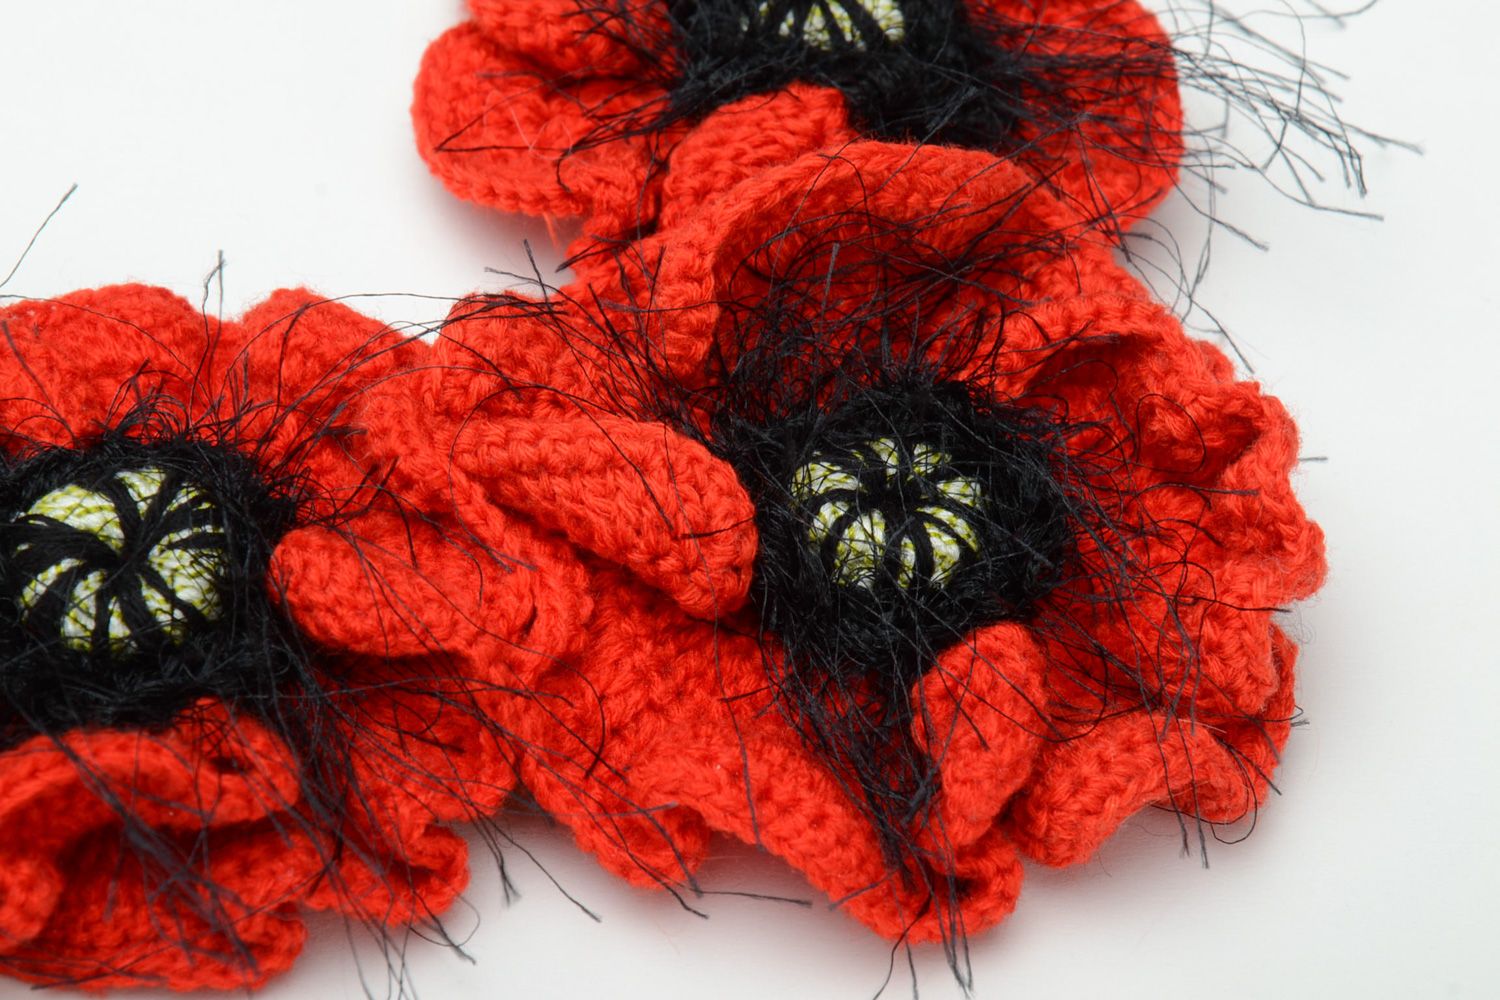 Homemade crochet flower necklace with beads Poppies photo 3